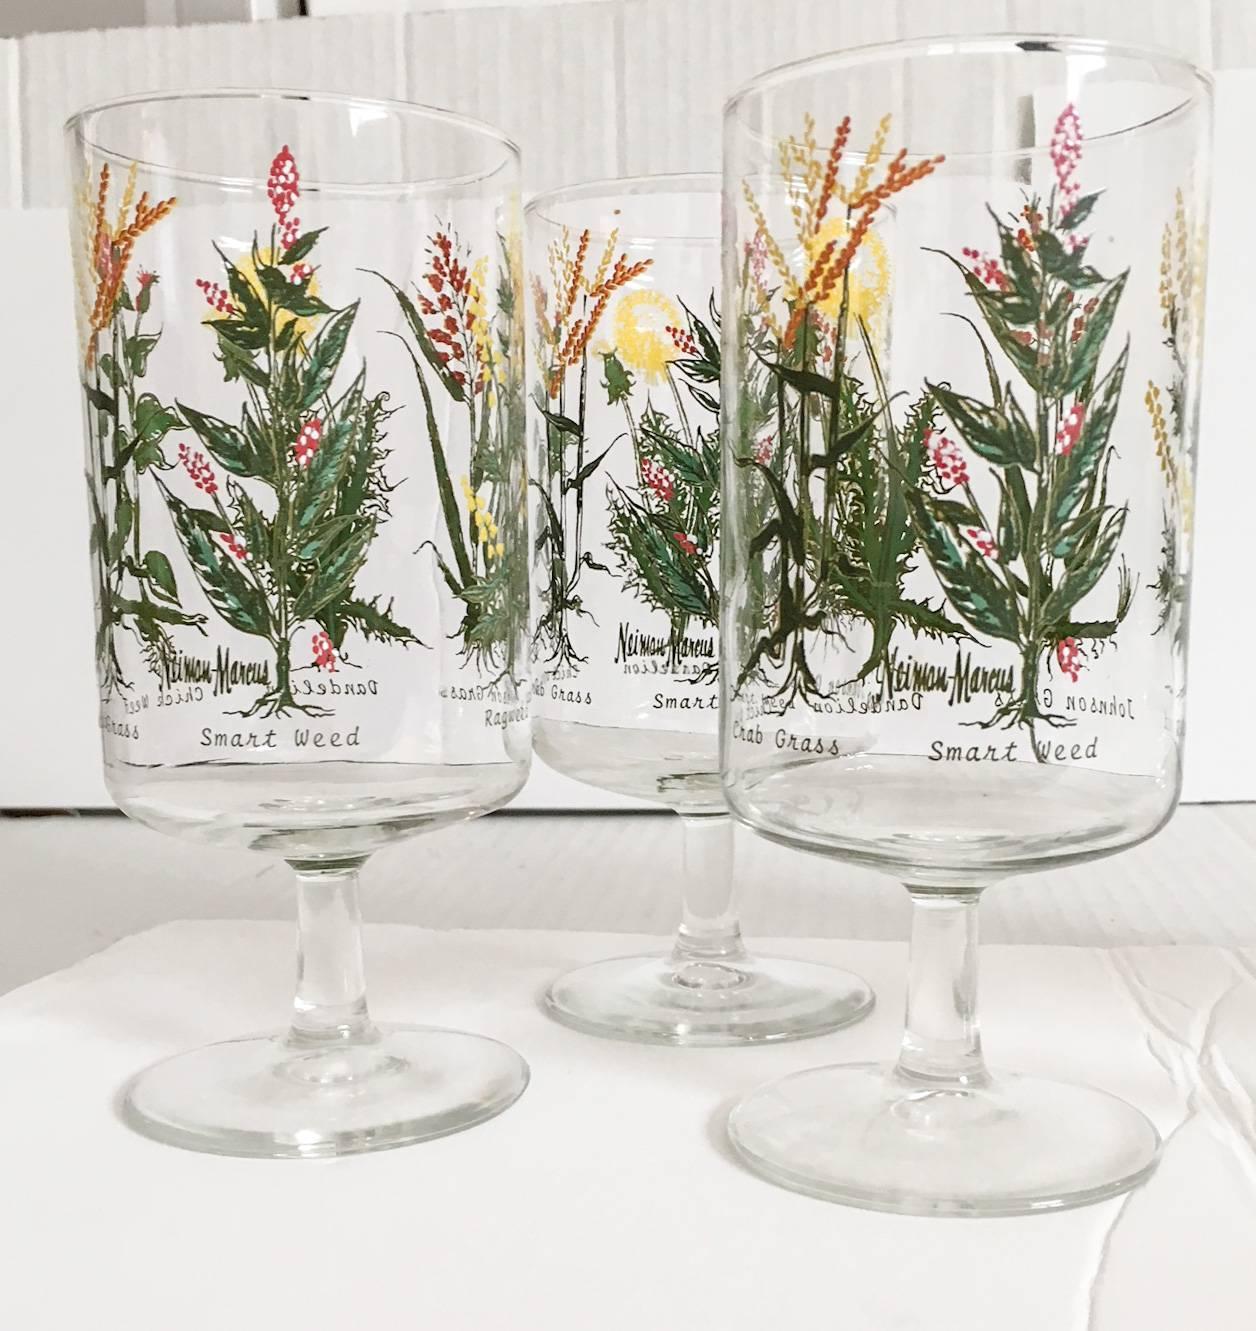 Delightful set of six glass water or iced tea glasses by Neiman-Marcus, circa 1970s. Each glass is decorated with various botanical illustrations, including Johnson Grass, Dandelion, Chick Weed, Crab Grass, Smart Weed, and Ragweed. Measure: Each,